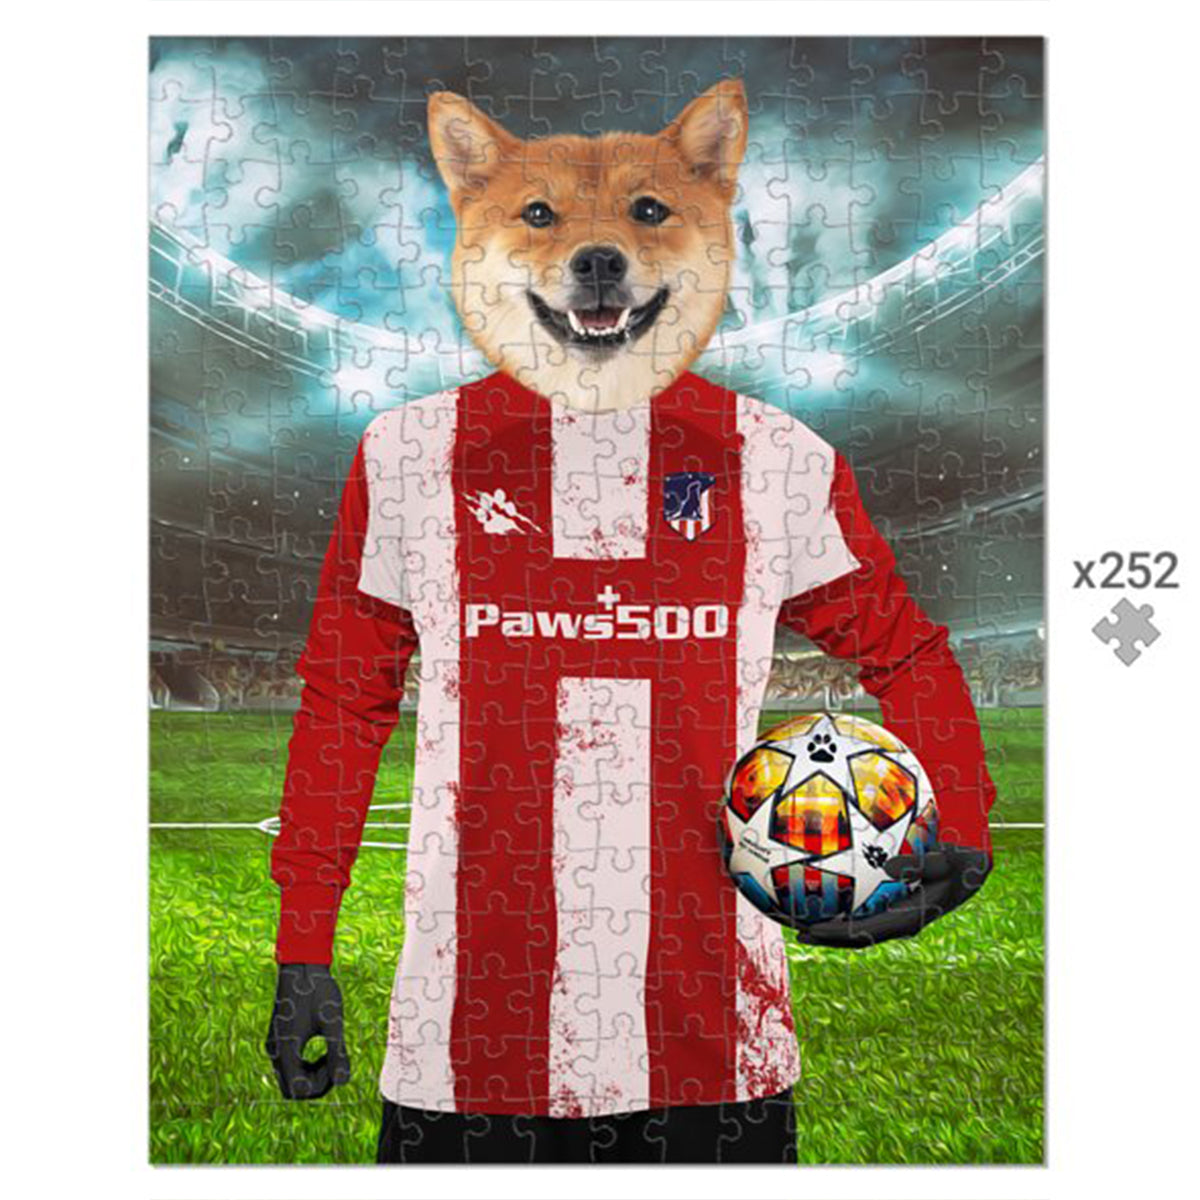 Pawtheletico Madrid Football Club Paw & Glory, paw and glory, dog portraits as humans, custom pet paintings, cat picture painting, dog and couple portrait, aristocrat dog painting, animal portrait pictures, pet portraits